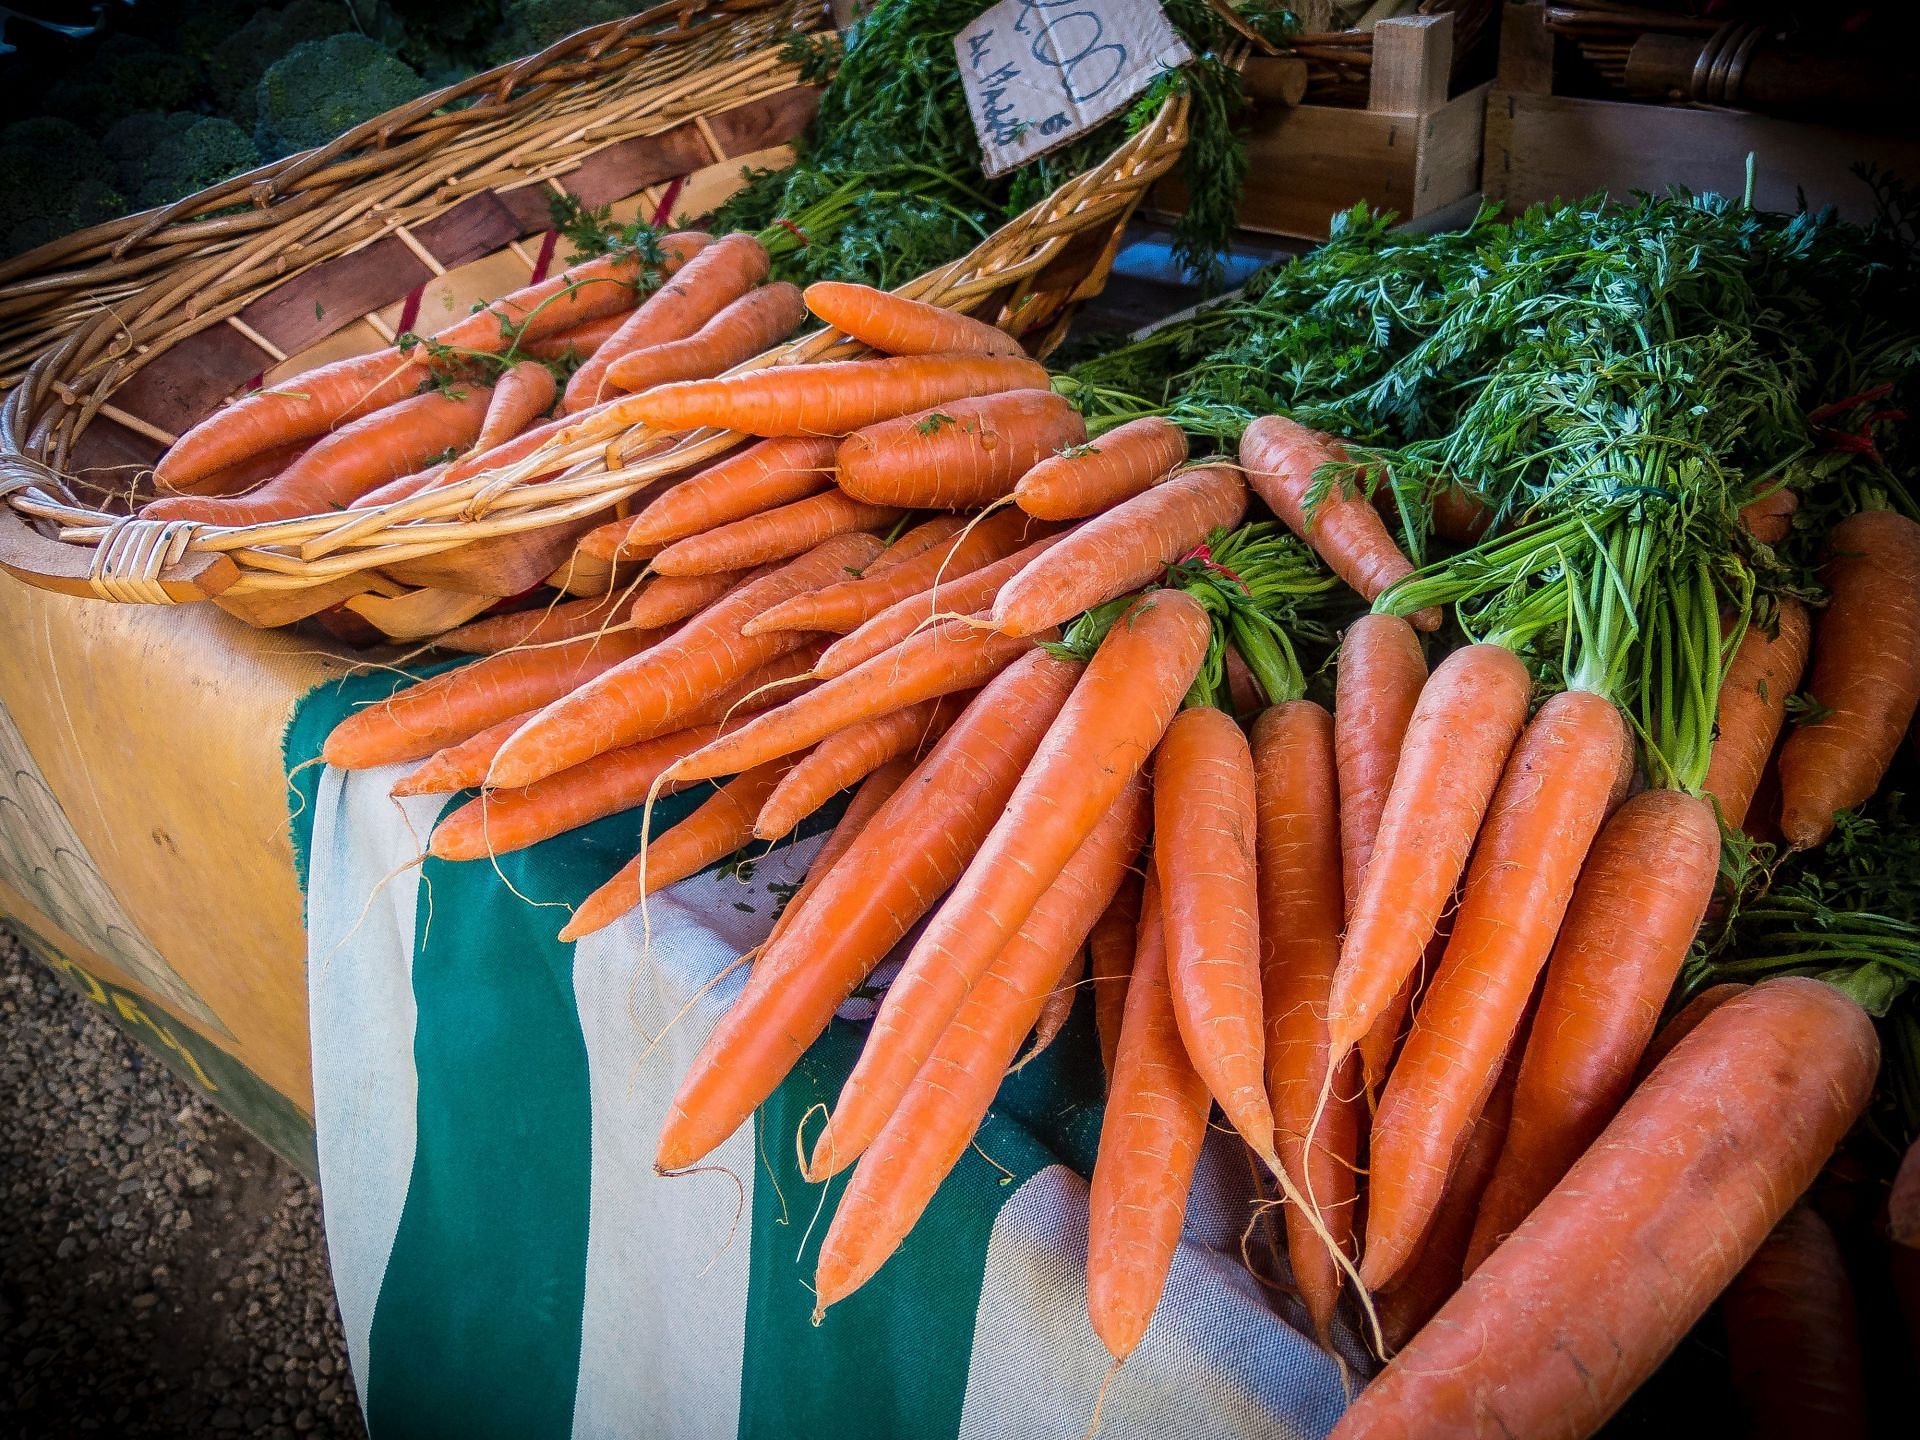 Carrots for Weight Loss: Fact or Fiction? (image via Pexels)